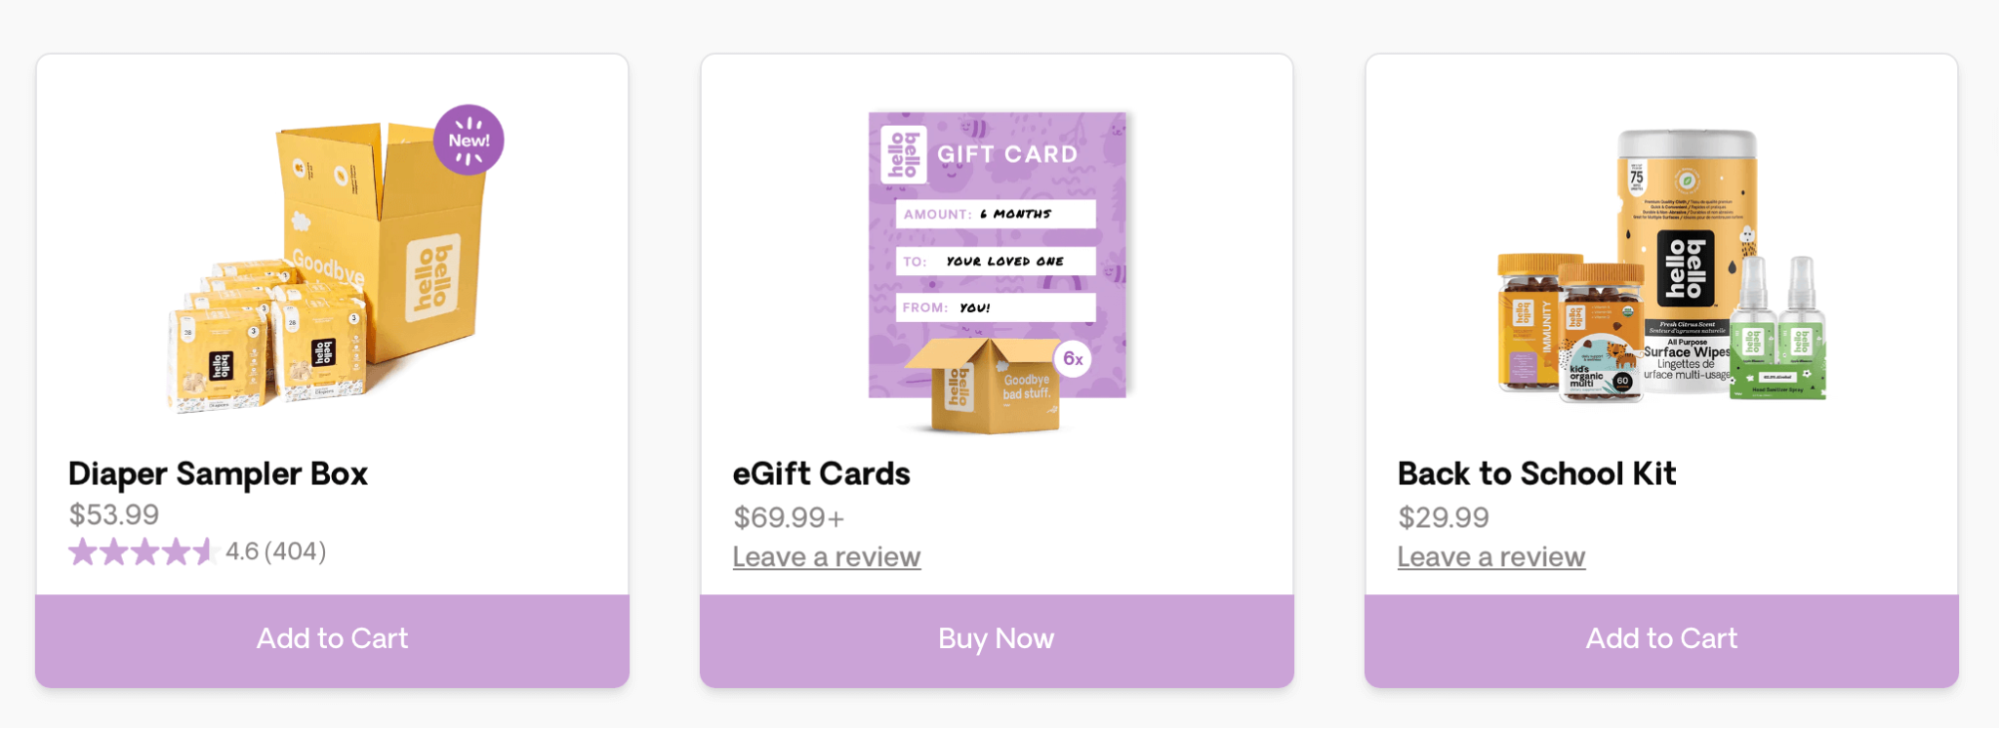 A screenshot from Hello Bello's website showing different options to gift new parents: A Diaper Sampler Box, eGift Cards, and a Back to School Kit.